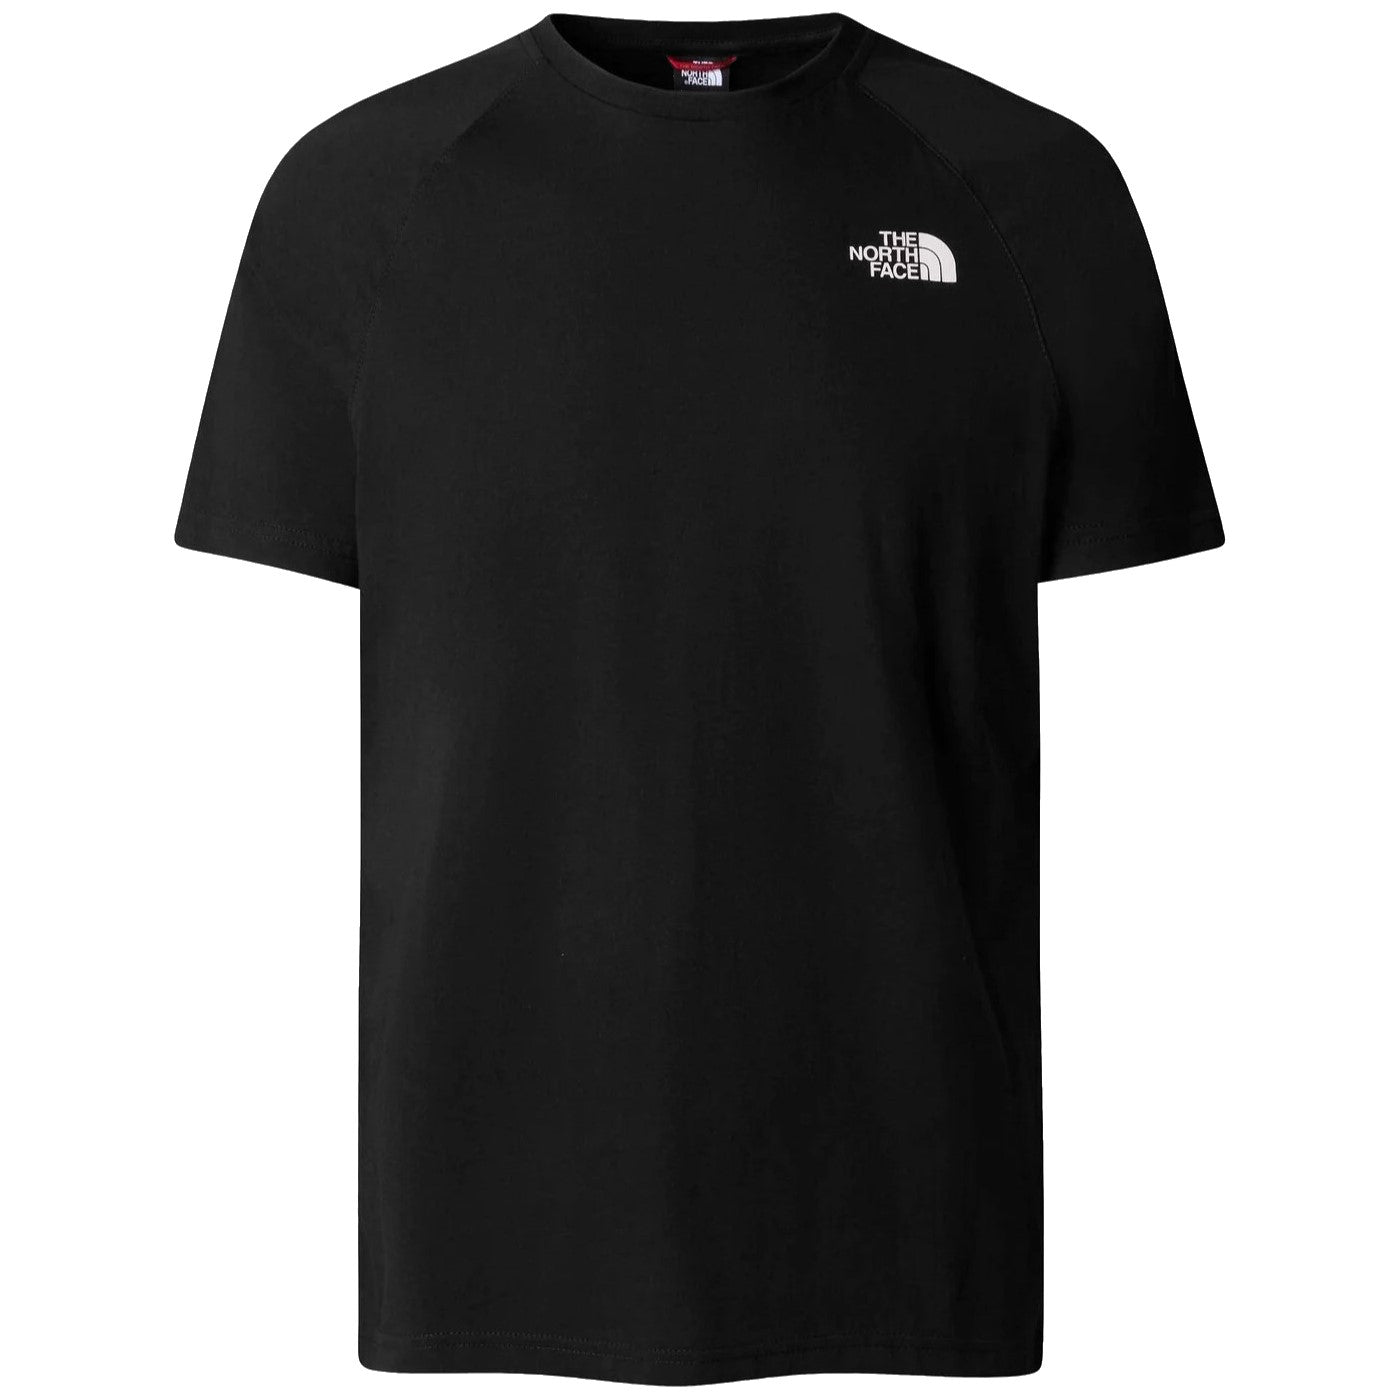 North Face Ss Tee